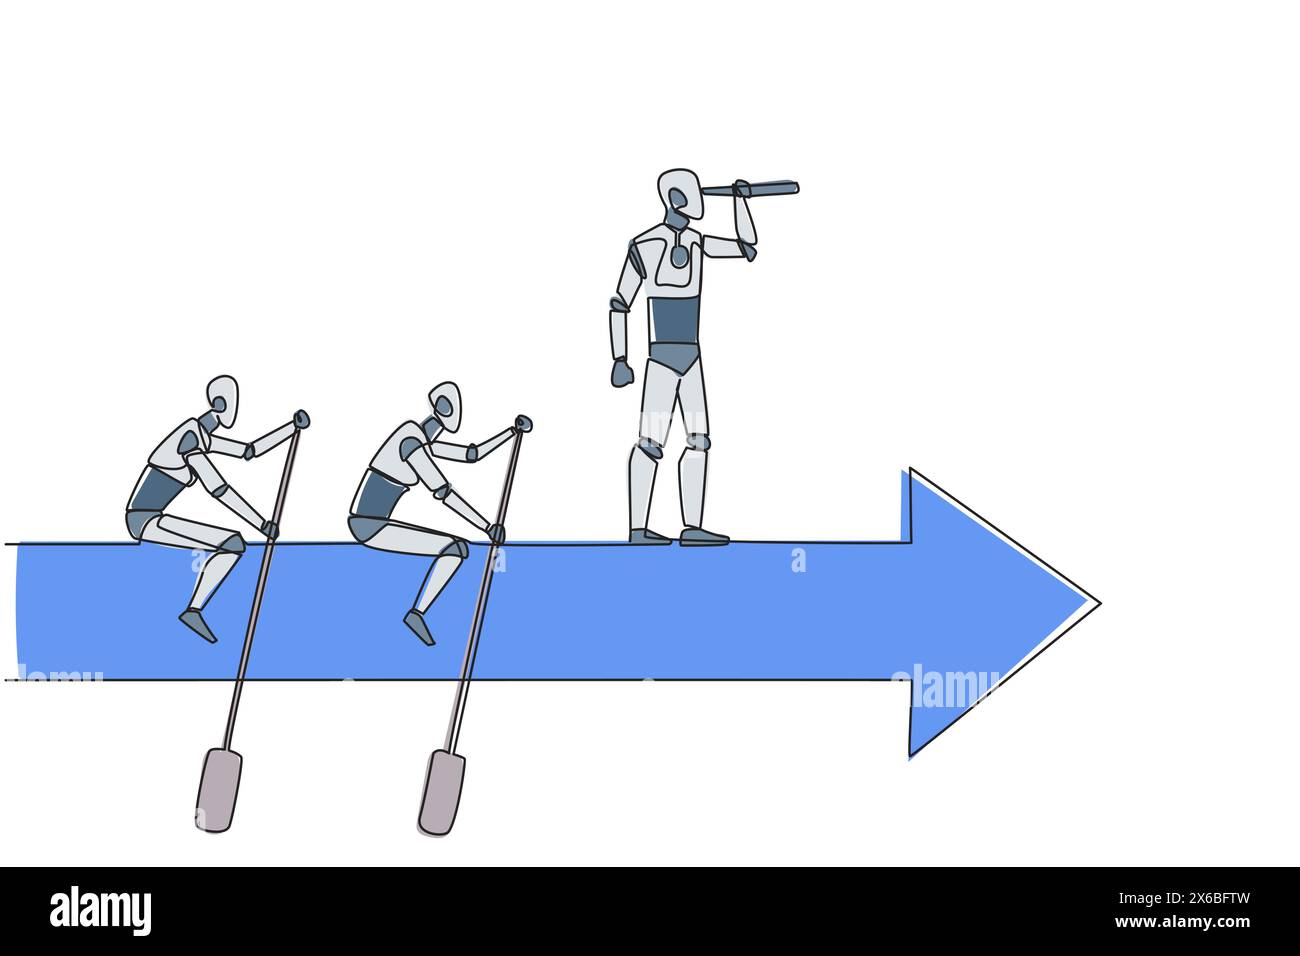 Continuous one line drawing three robots ride arrows. Teamwork with two of them rowing, the rest standing up using binoculars. Future tech development Stock Vector